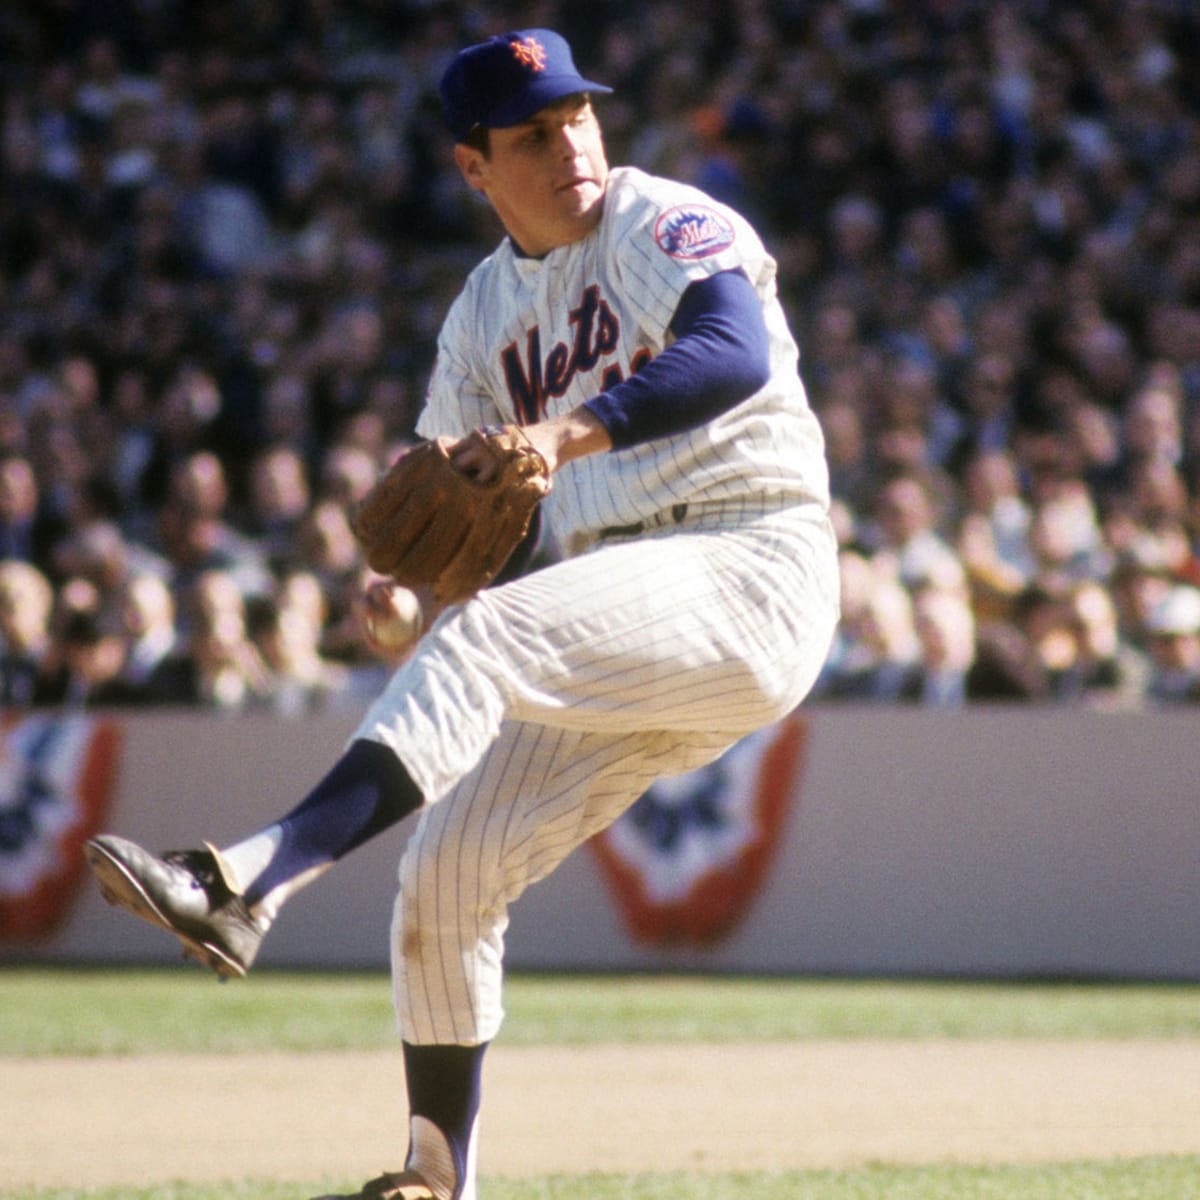 Tom Seaver, Hall of Fame pitcher who led 'Miracle Mets' to victory, has died  at 75